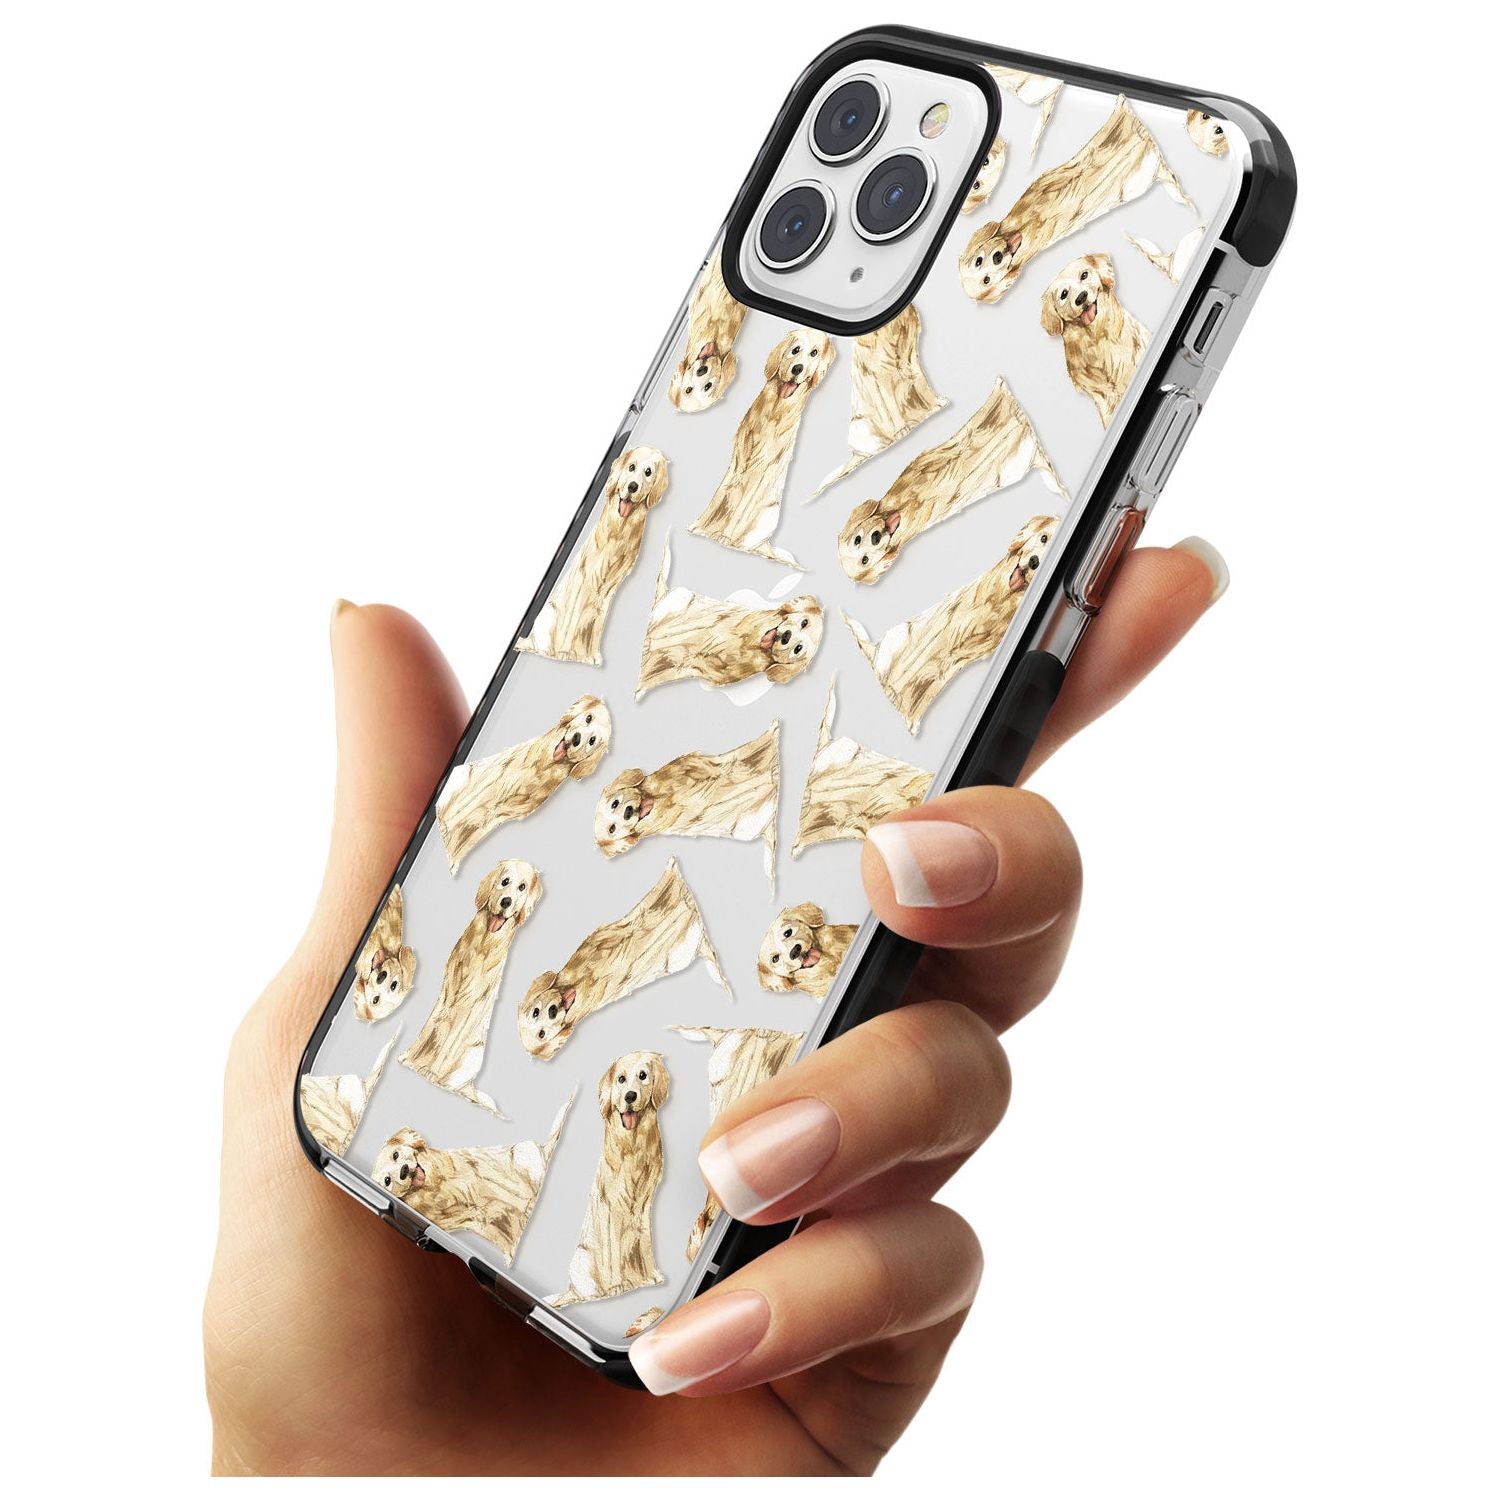 Golden Retriever Watercolour Dog Pattern Black Impact Phone Case for iPhone 11 Pro Max